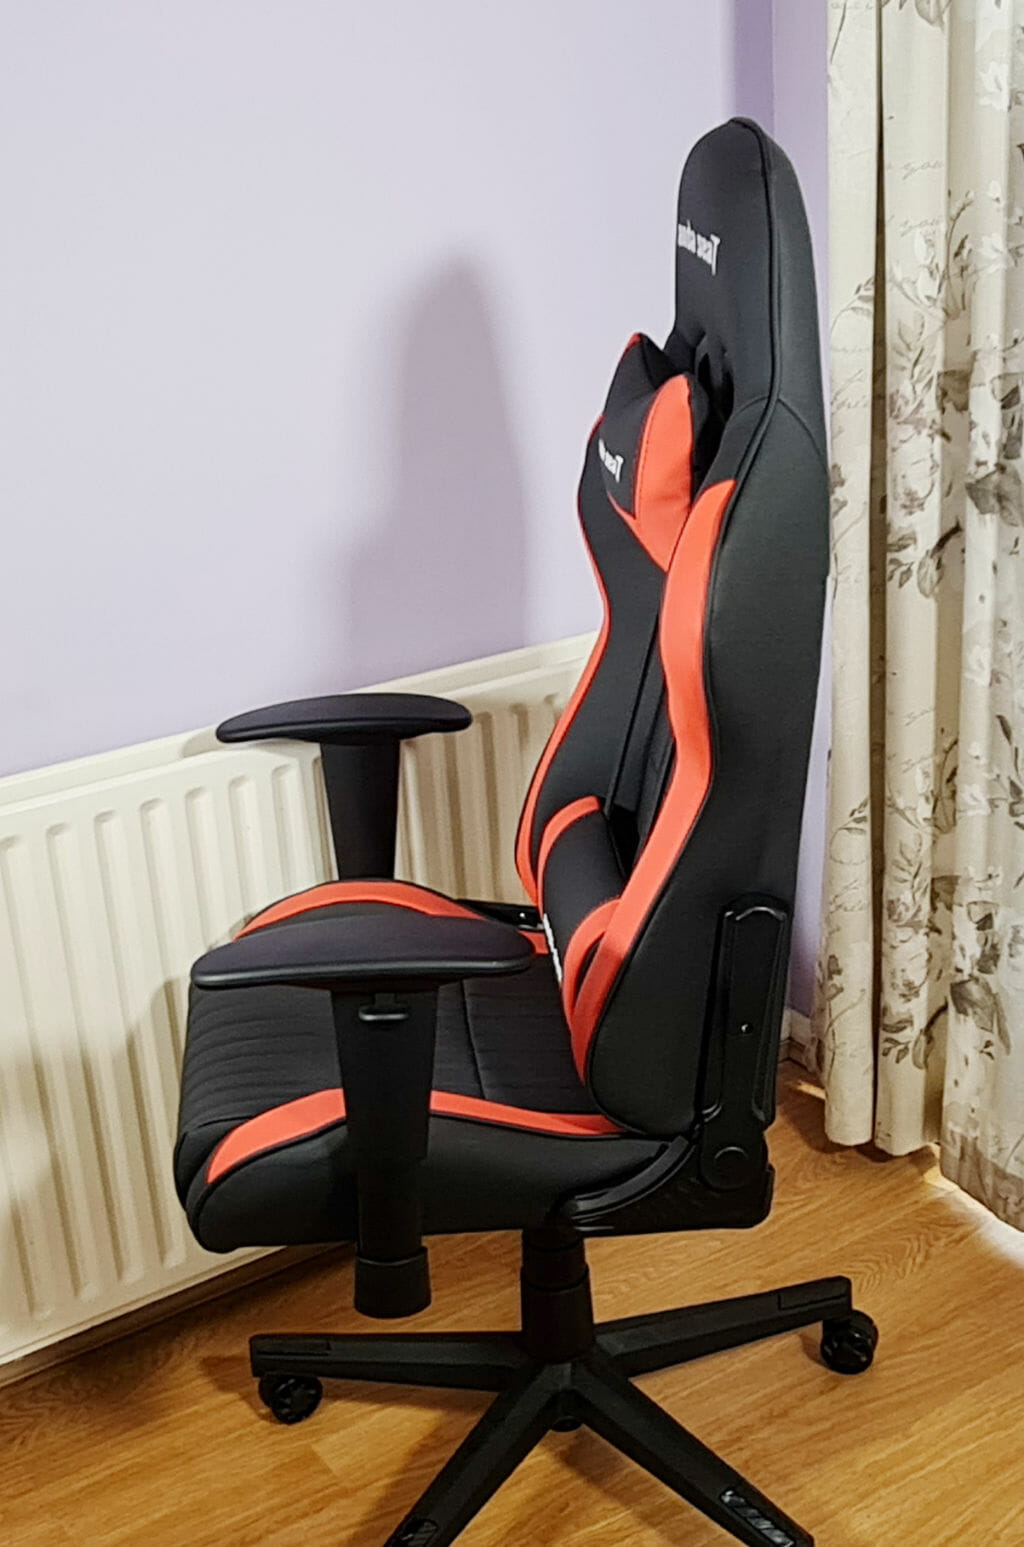 AndaSeat Jungle Series Premium Gaming Chair Review side view